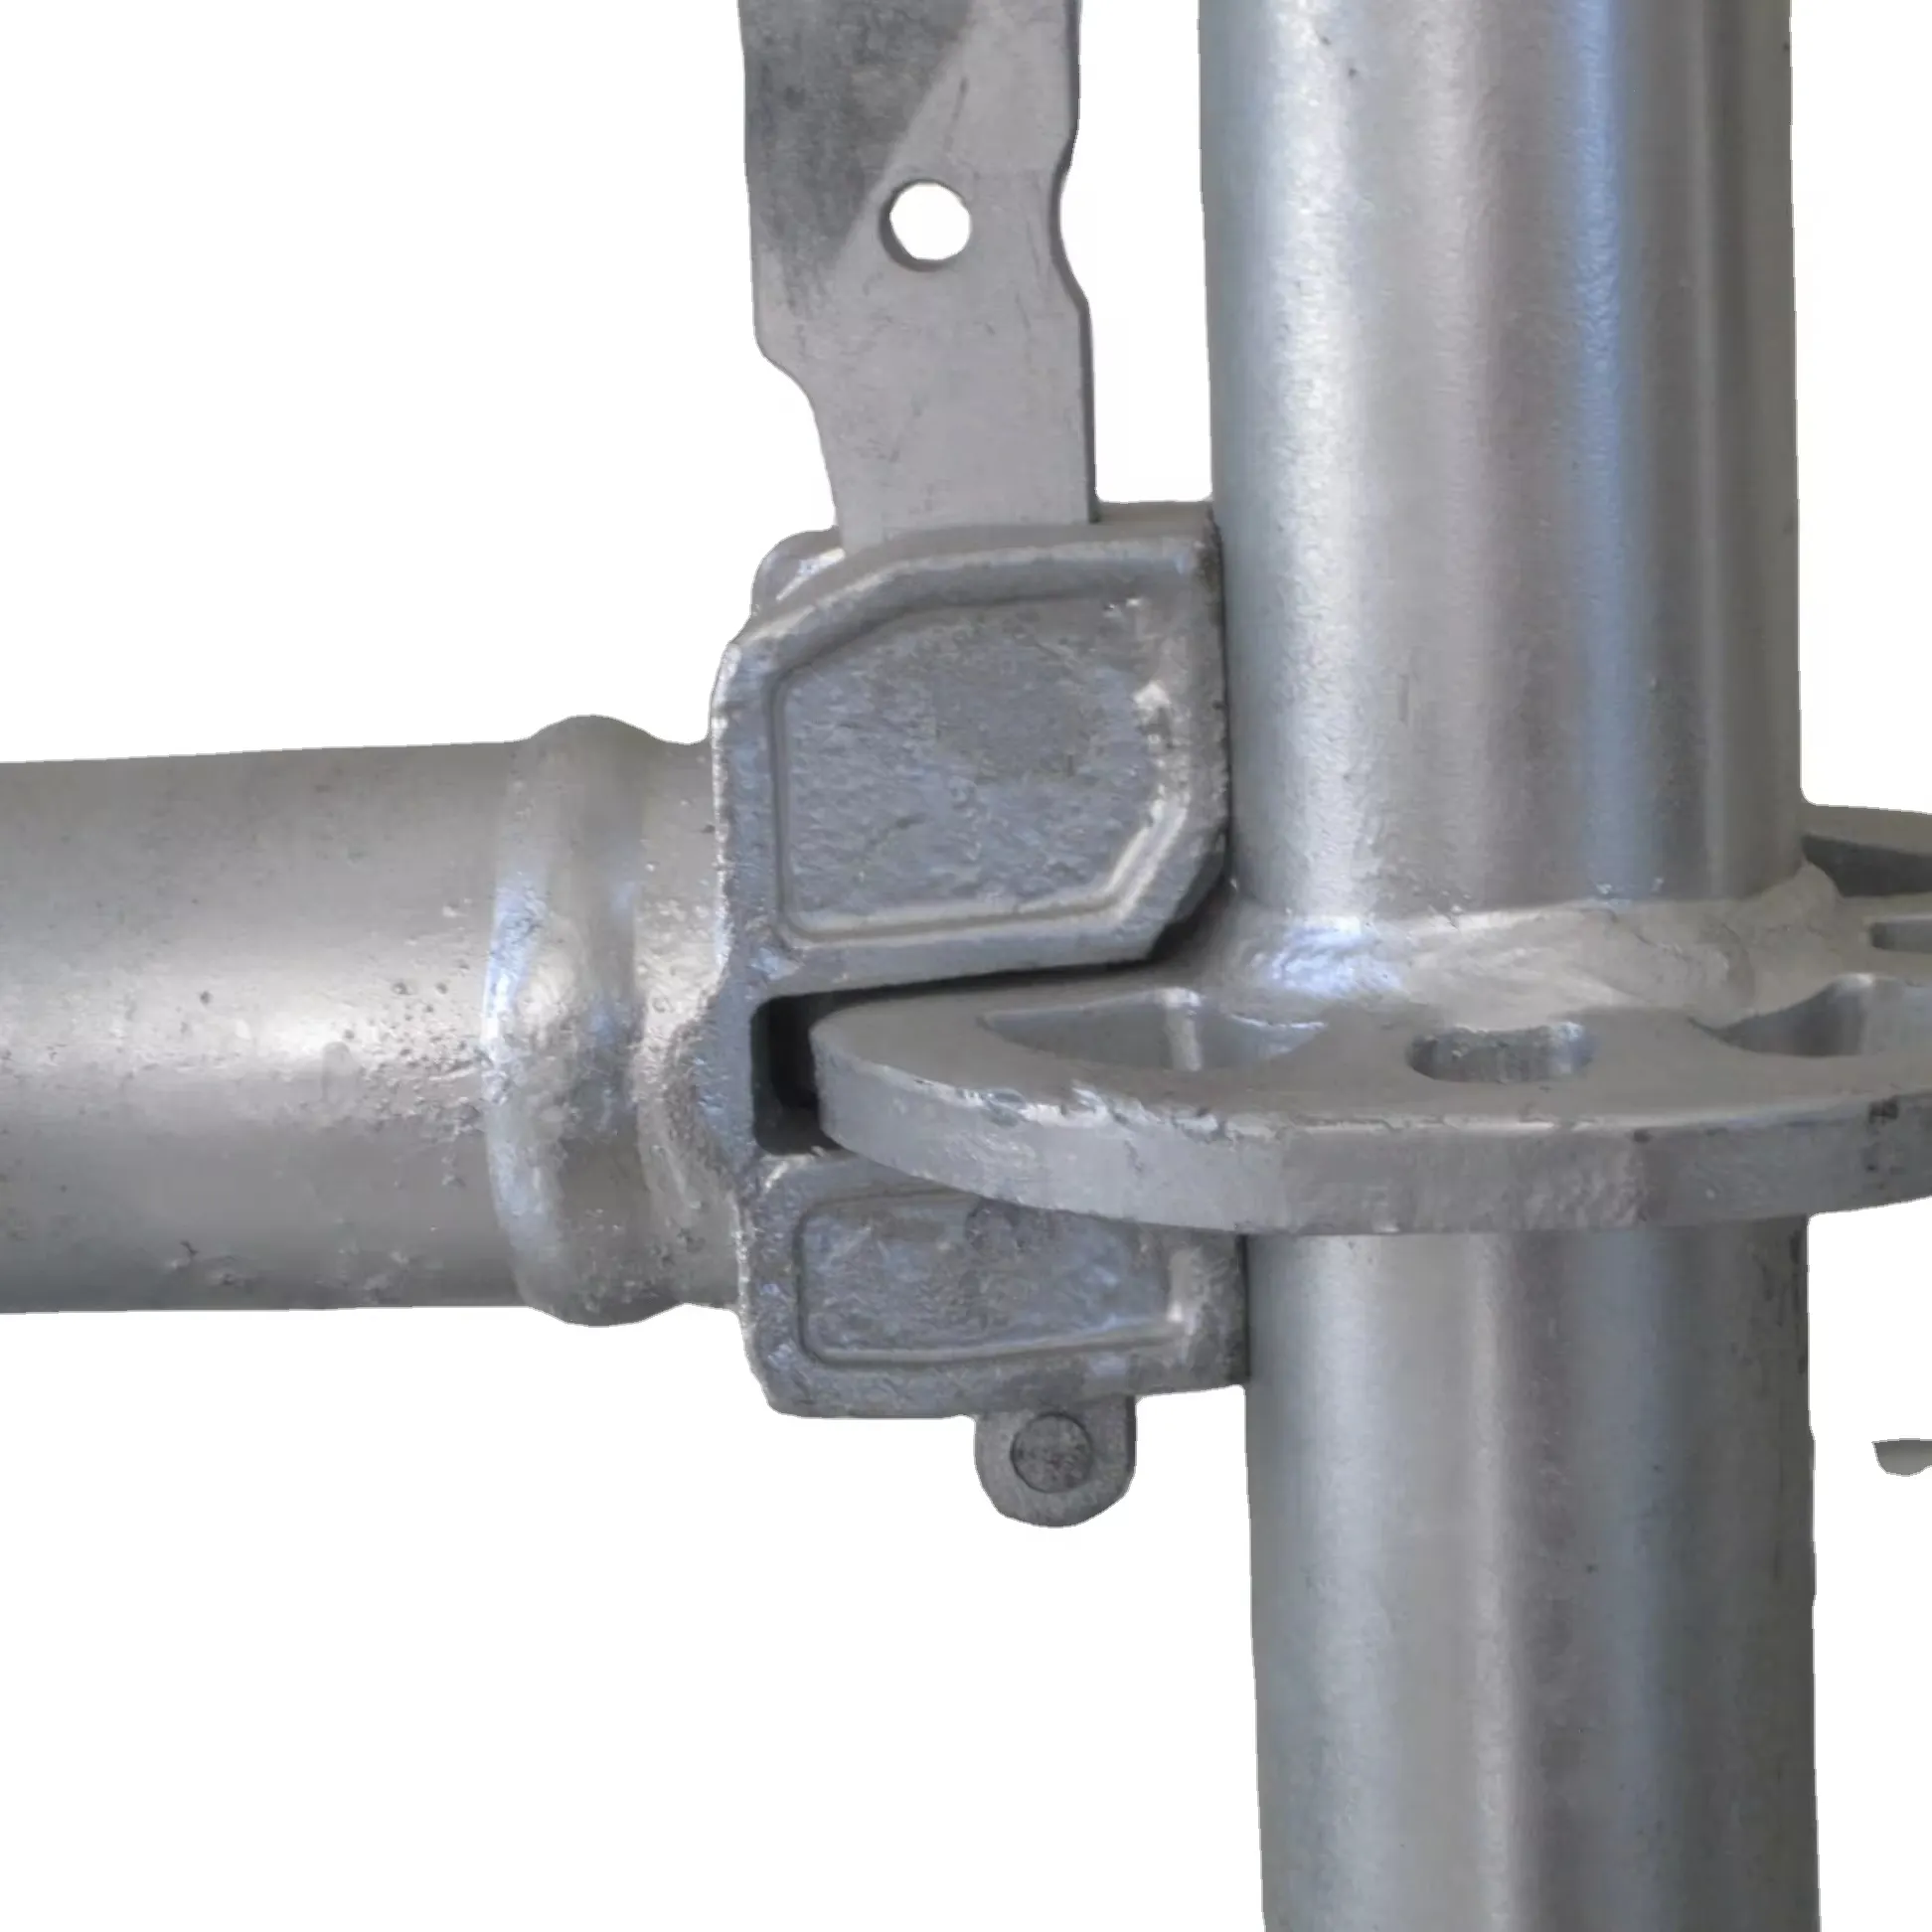 Certified Standard of Ringlock Scaffolding System (Exp 20+ Years, Ringlock Verticals)